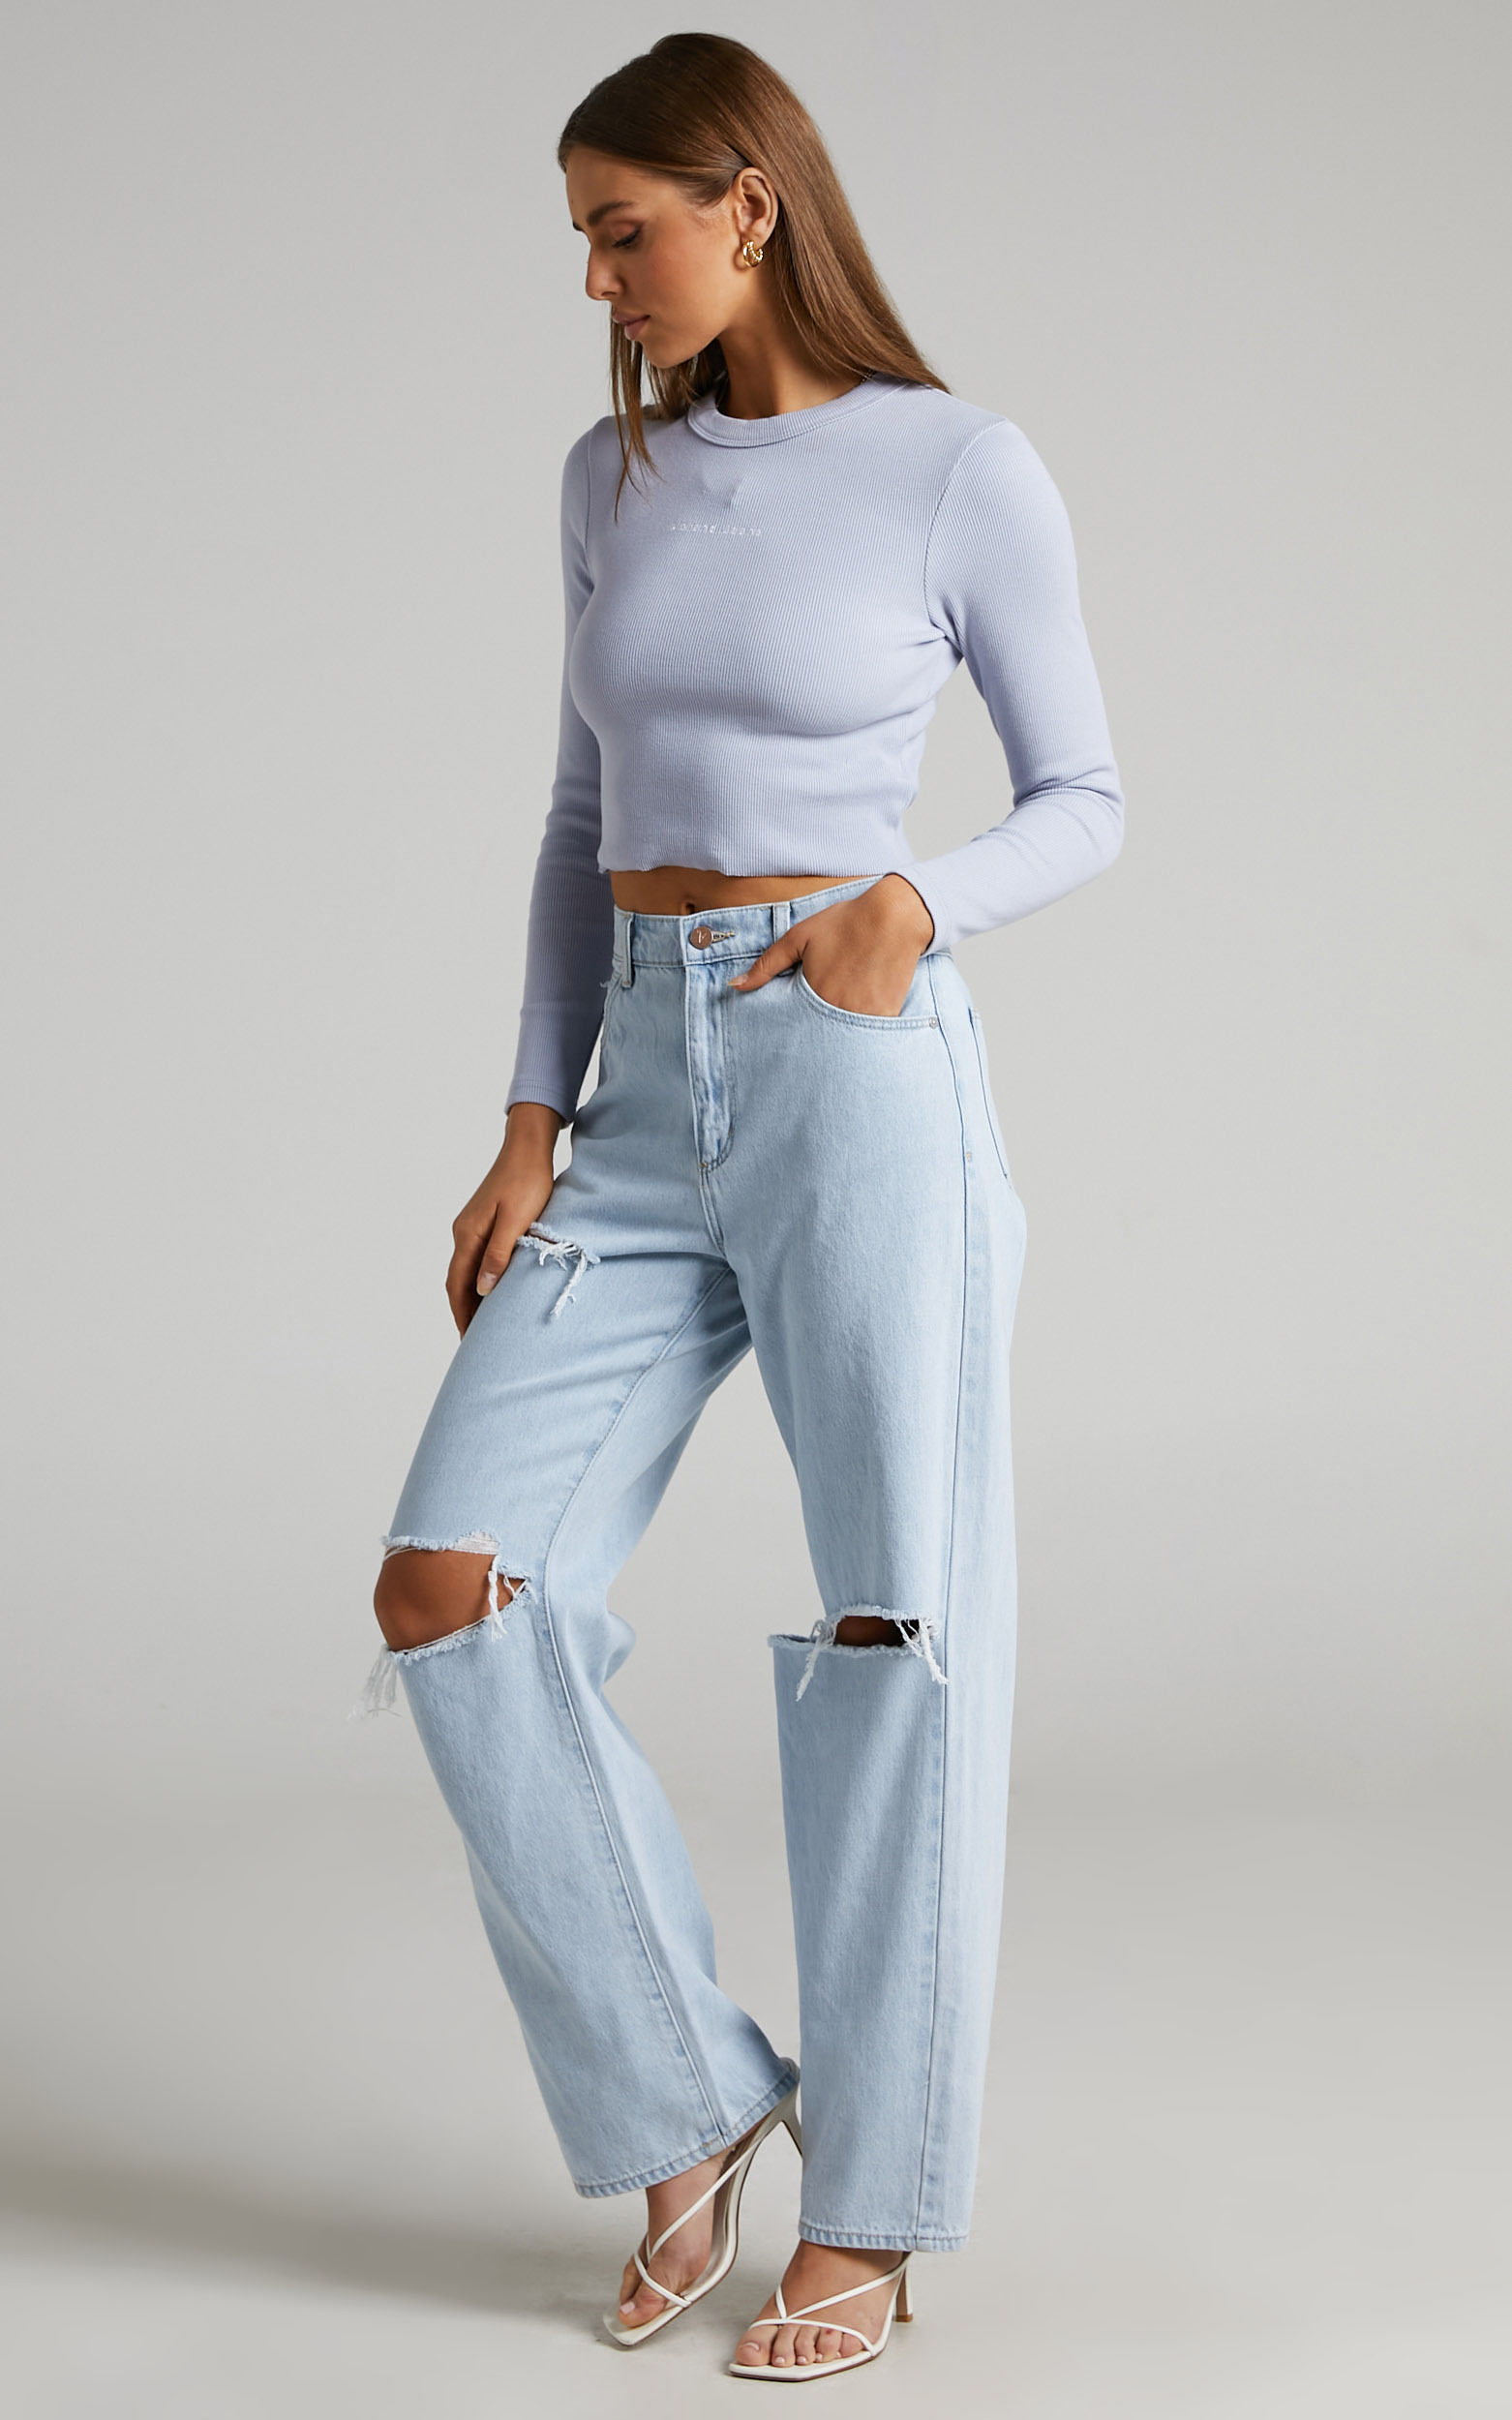 Abrand - A Heather Long Sleeve Tee in Dusty Blue - L, BLU1, hi-res image number null